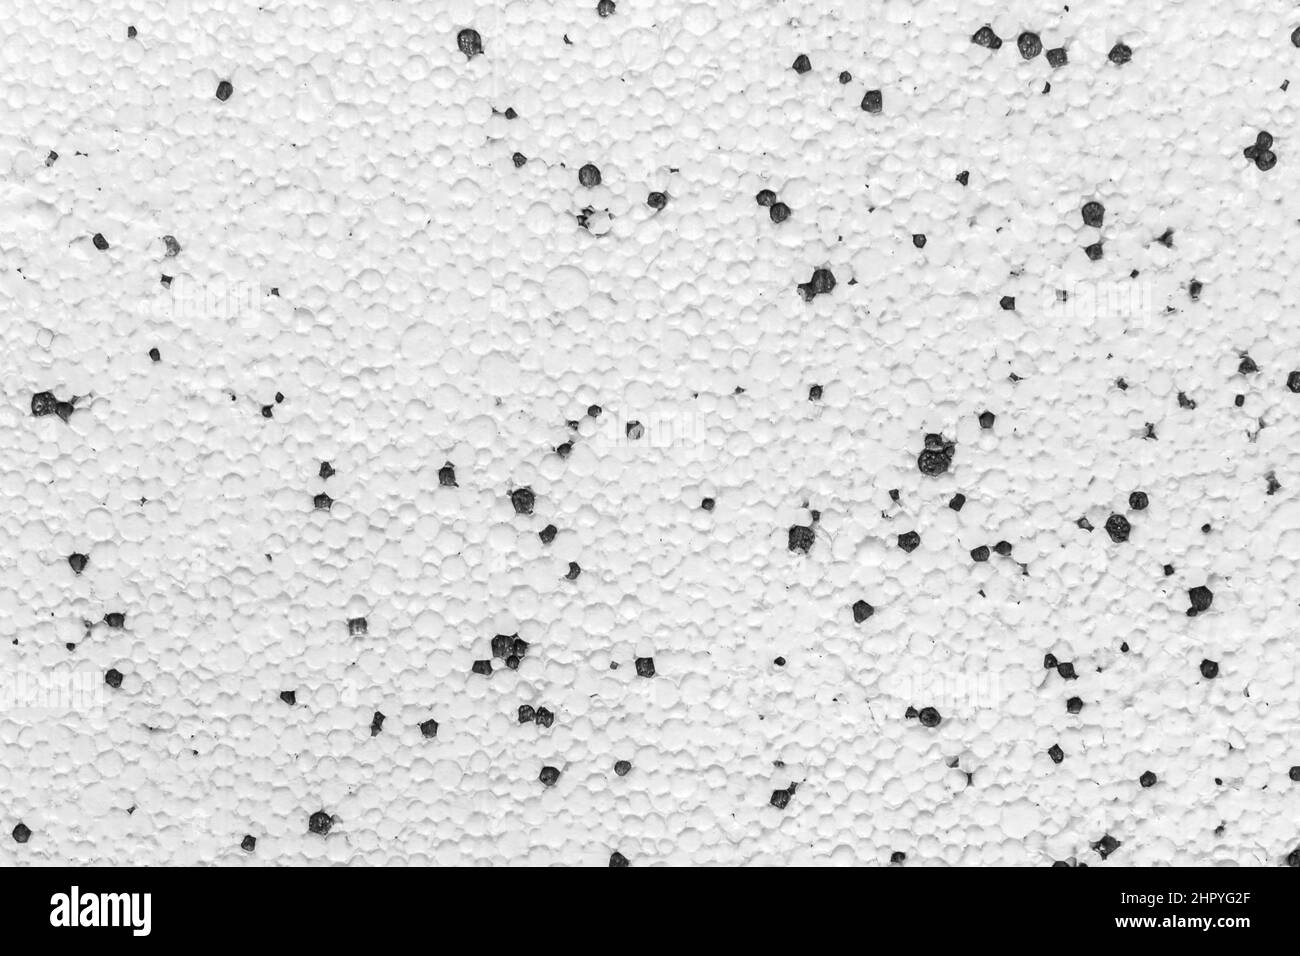 Styrofoam Polystyrene Plasterboard Drywall Foam Building Material Surface White With Abstract Black Pattern Dots Wall Texture Background. Stock Photo